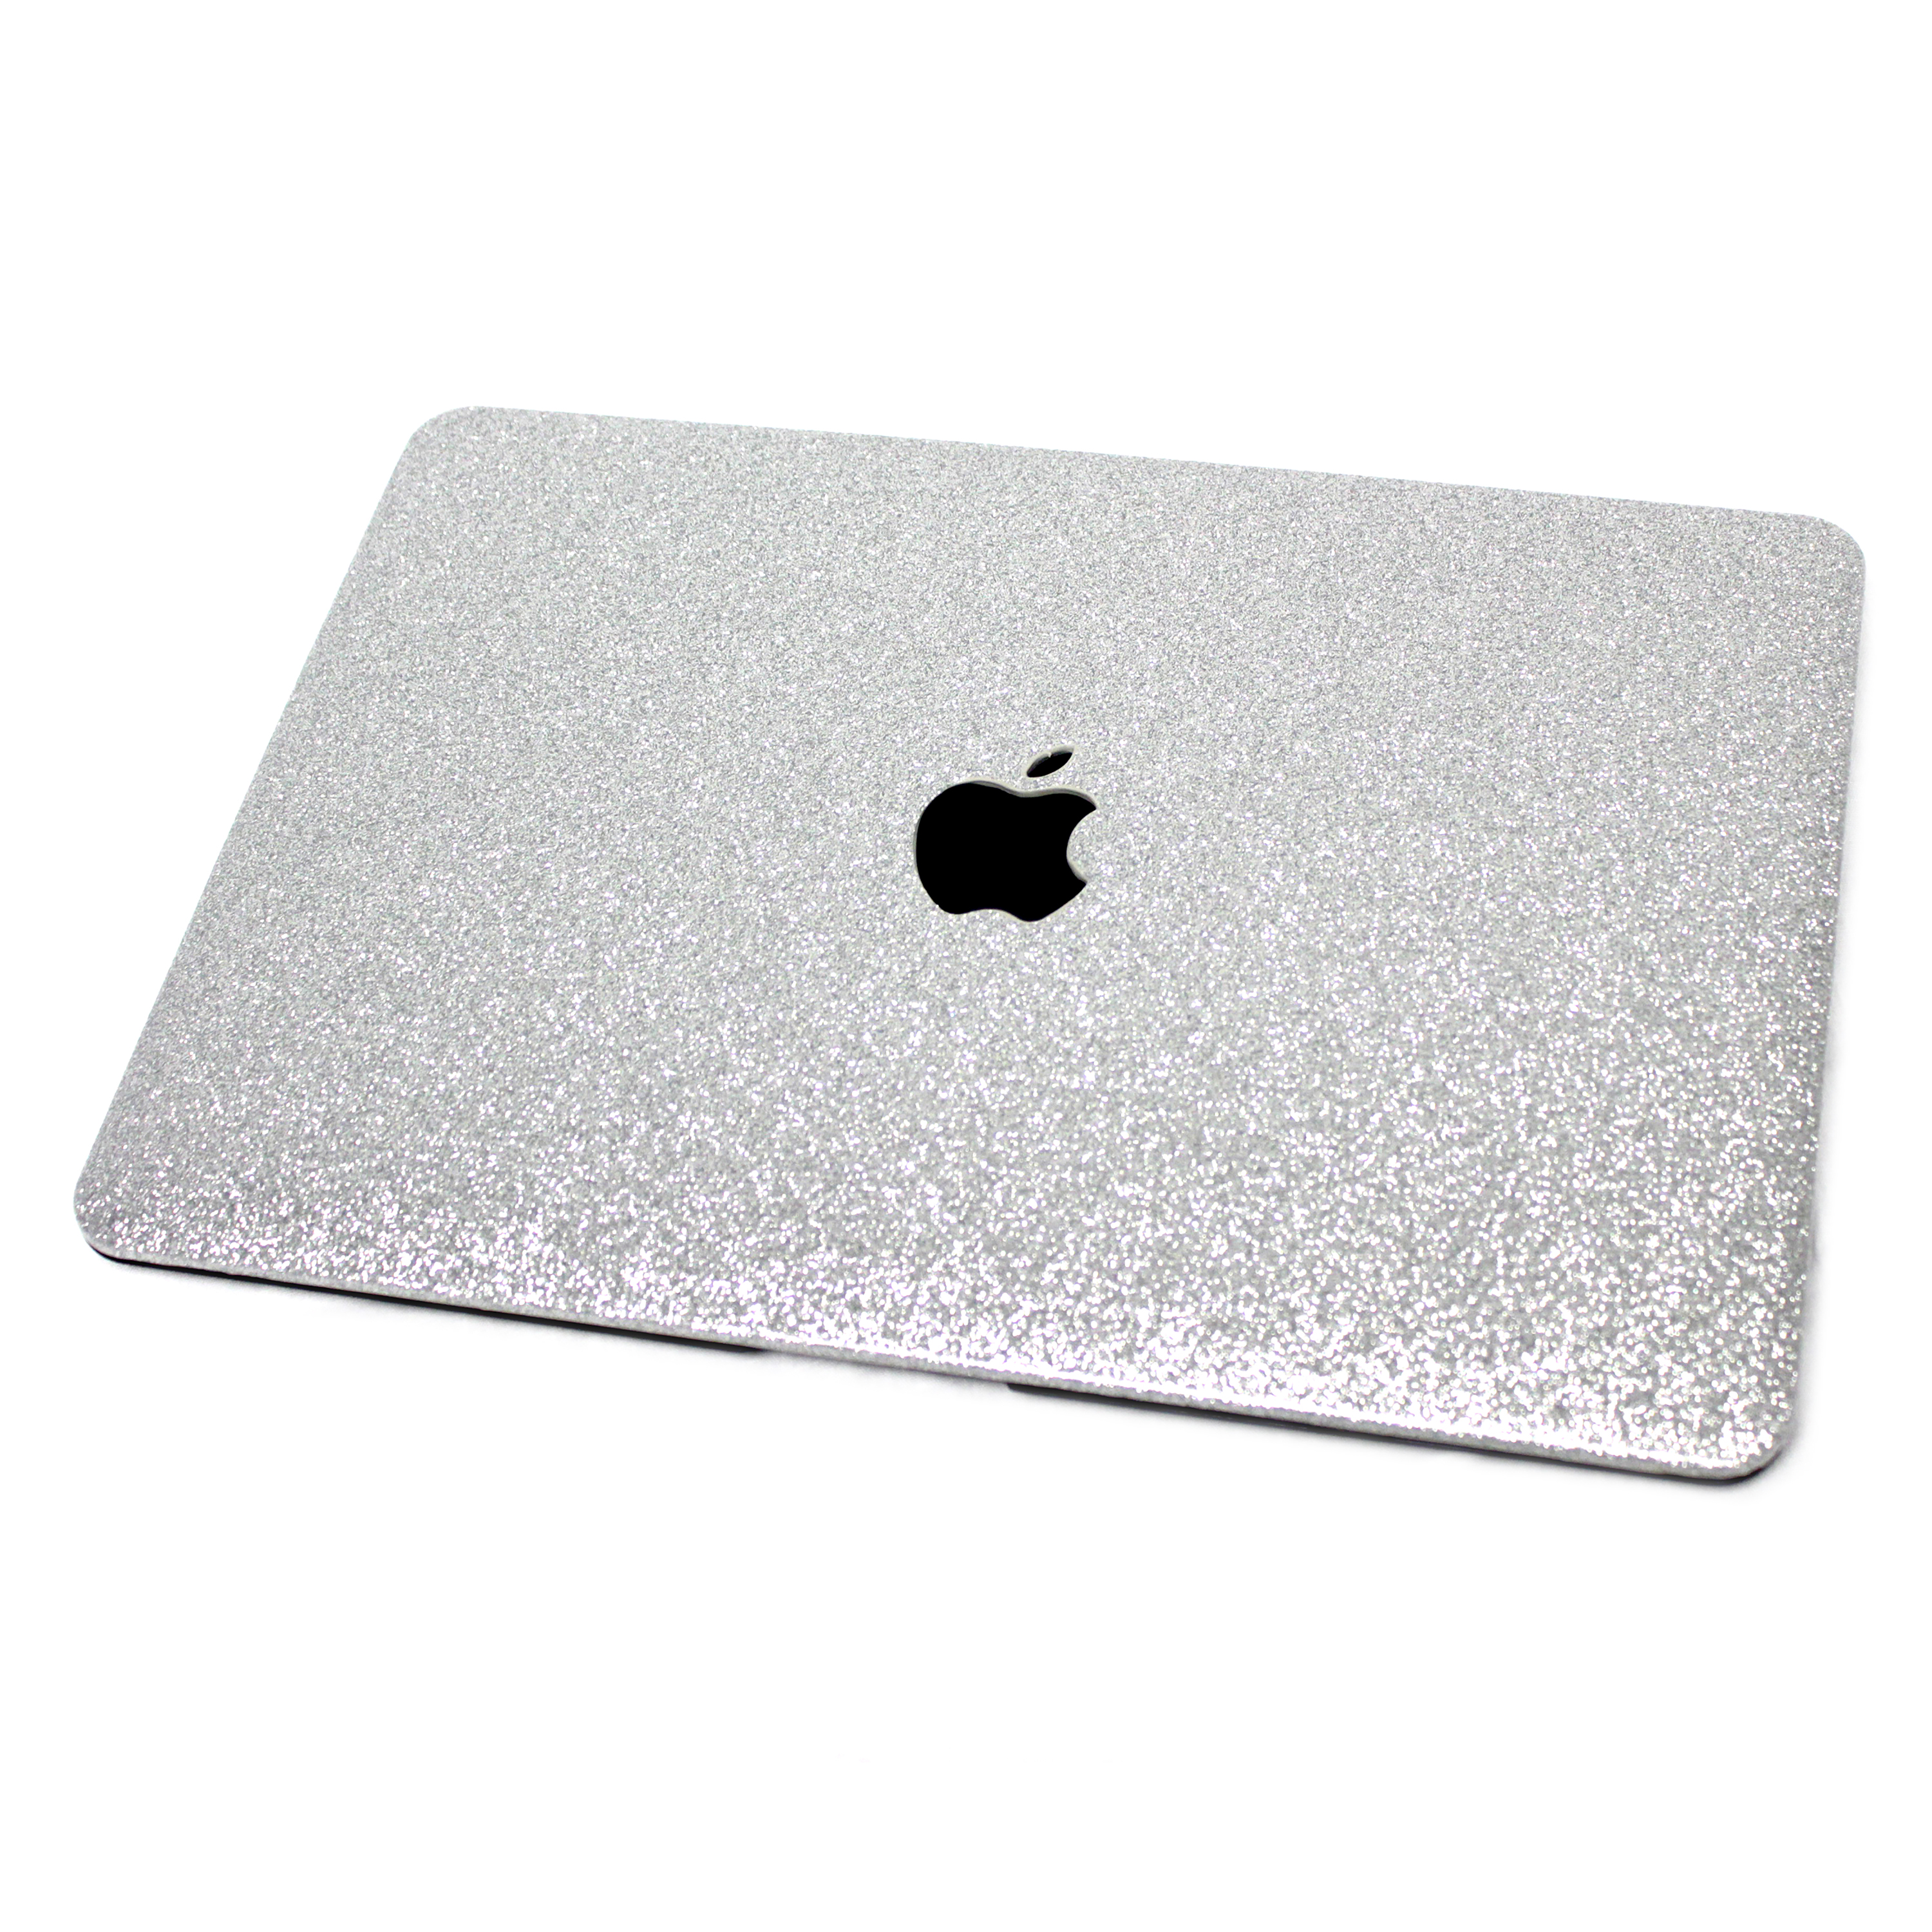 MacBook Hard Case Traditional Chinese Paper-Cut Plastic Hard Shell Compatible Mac 15inch MacBook Pro Case Protection Accessories for MacBook with Mouse Pad 